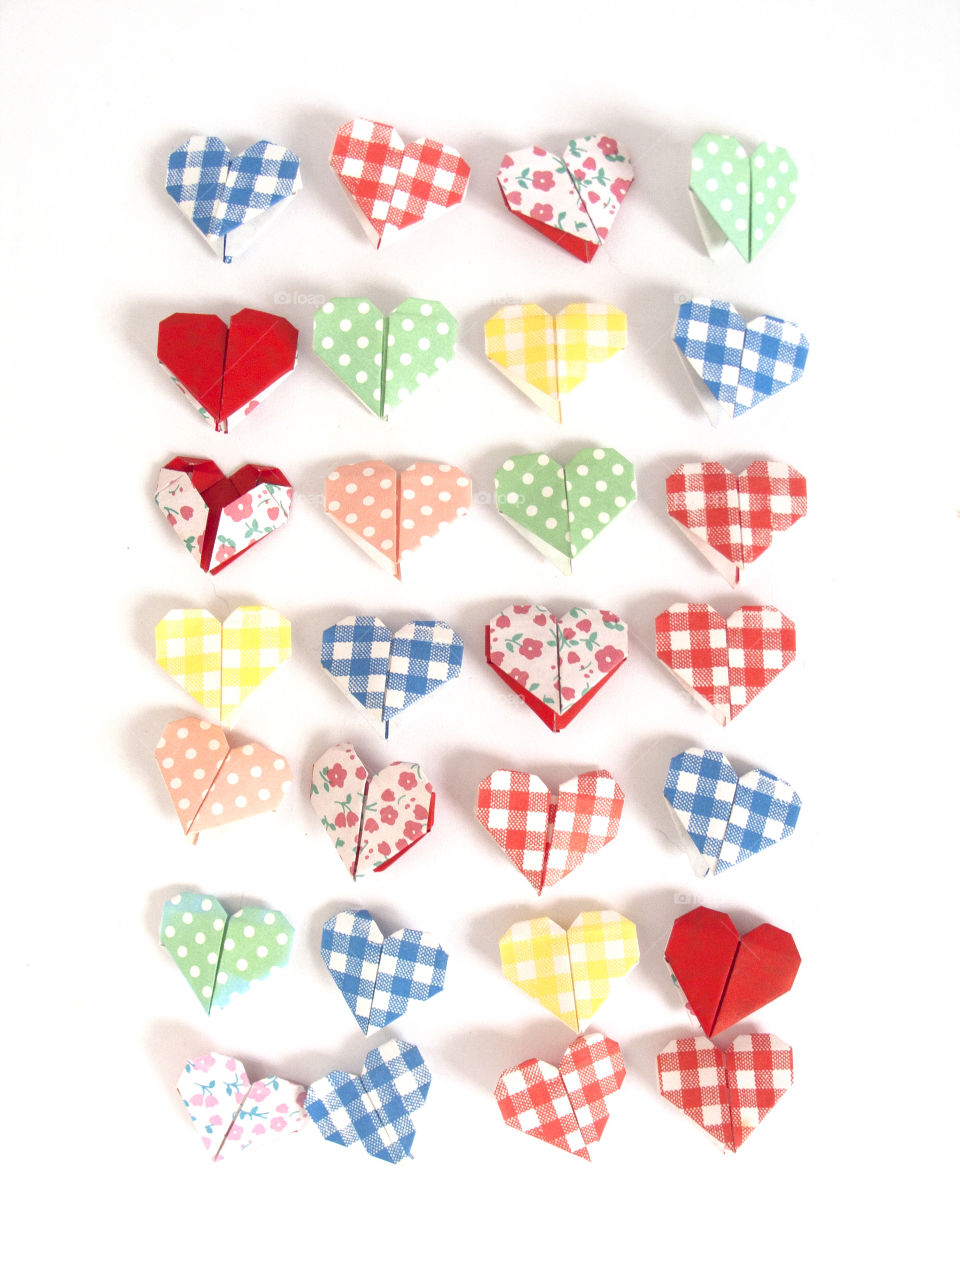 hearts origami. from pattern paper